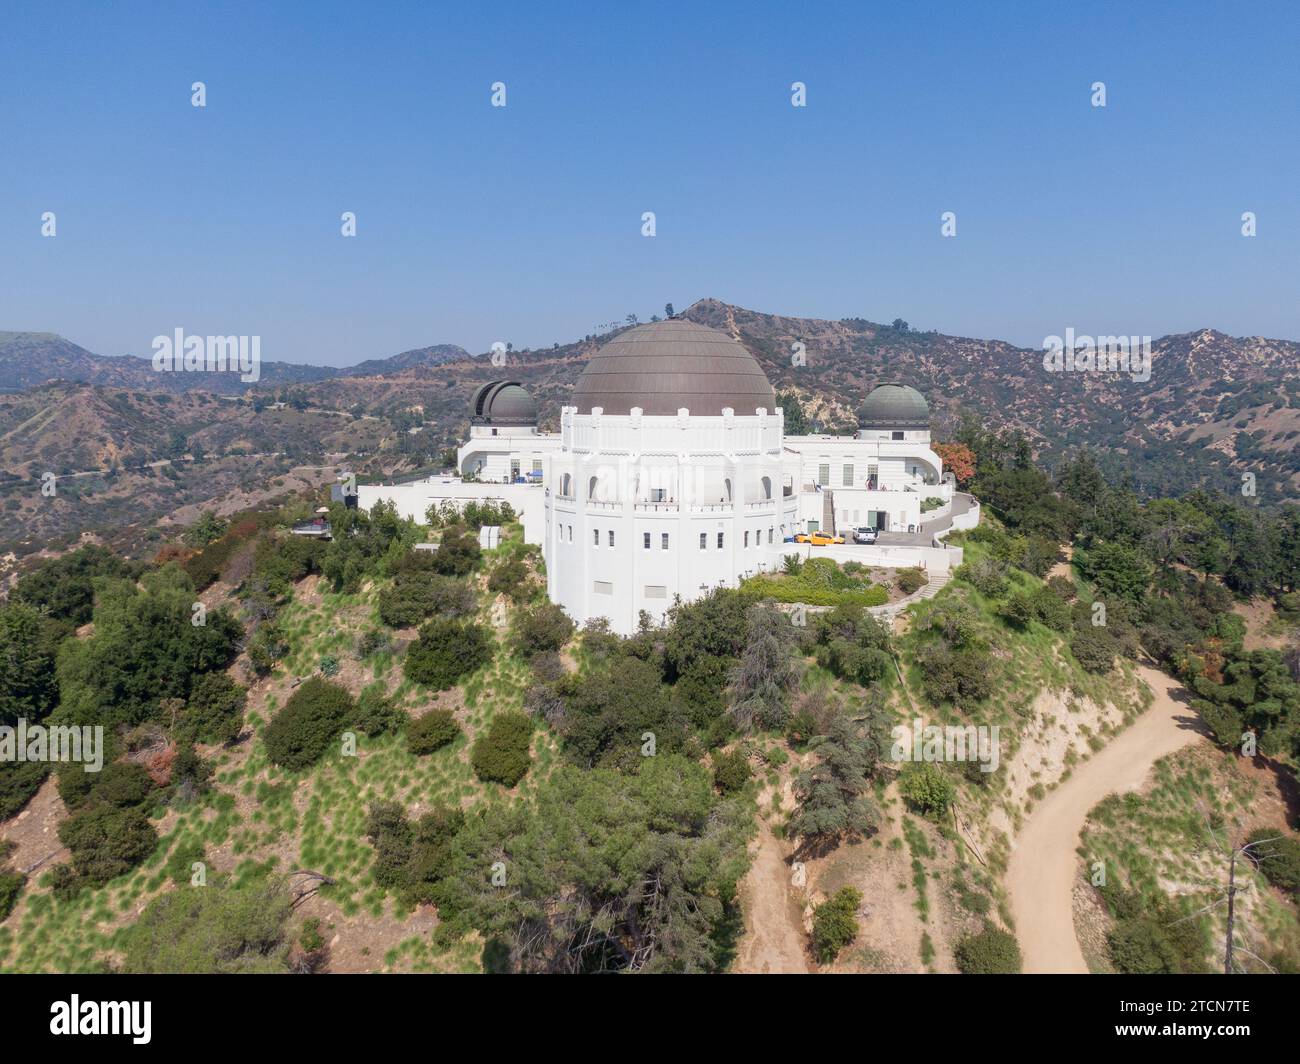 Stock drone images of Griffith Observatory in Los Angeles on a hazy summer afternoon. Stock Photo